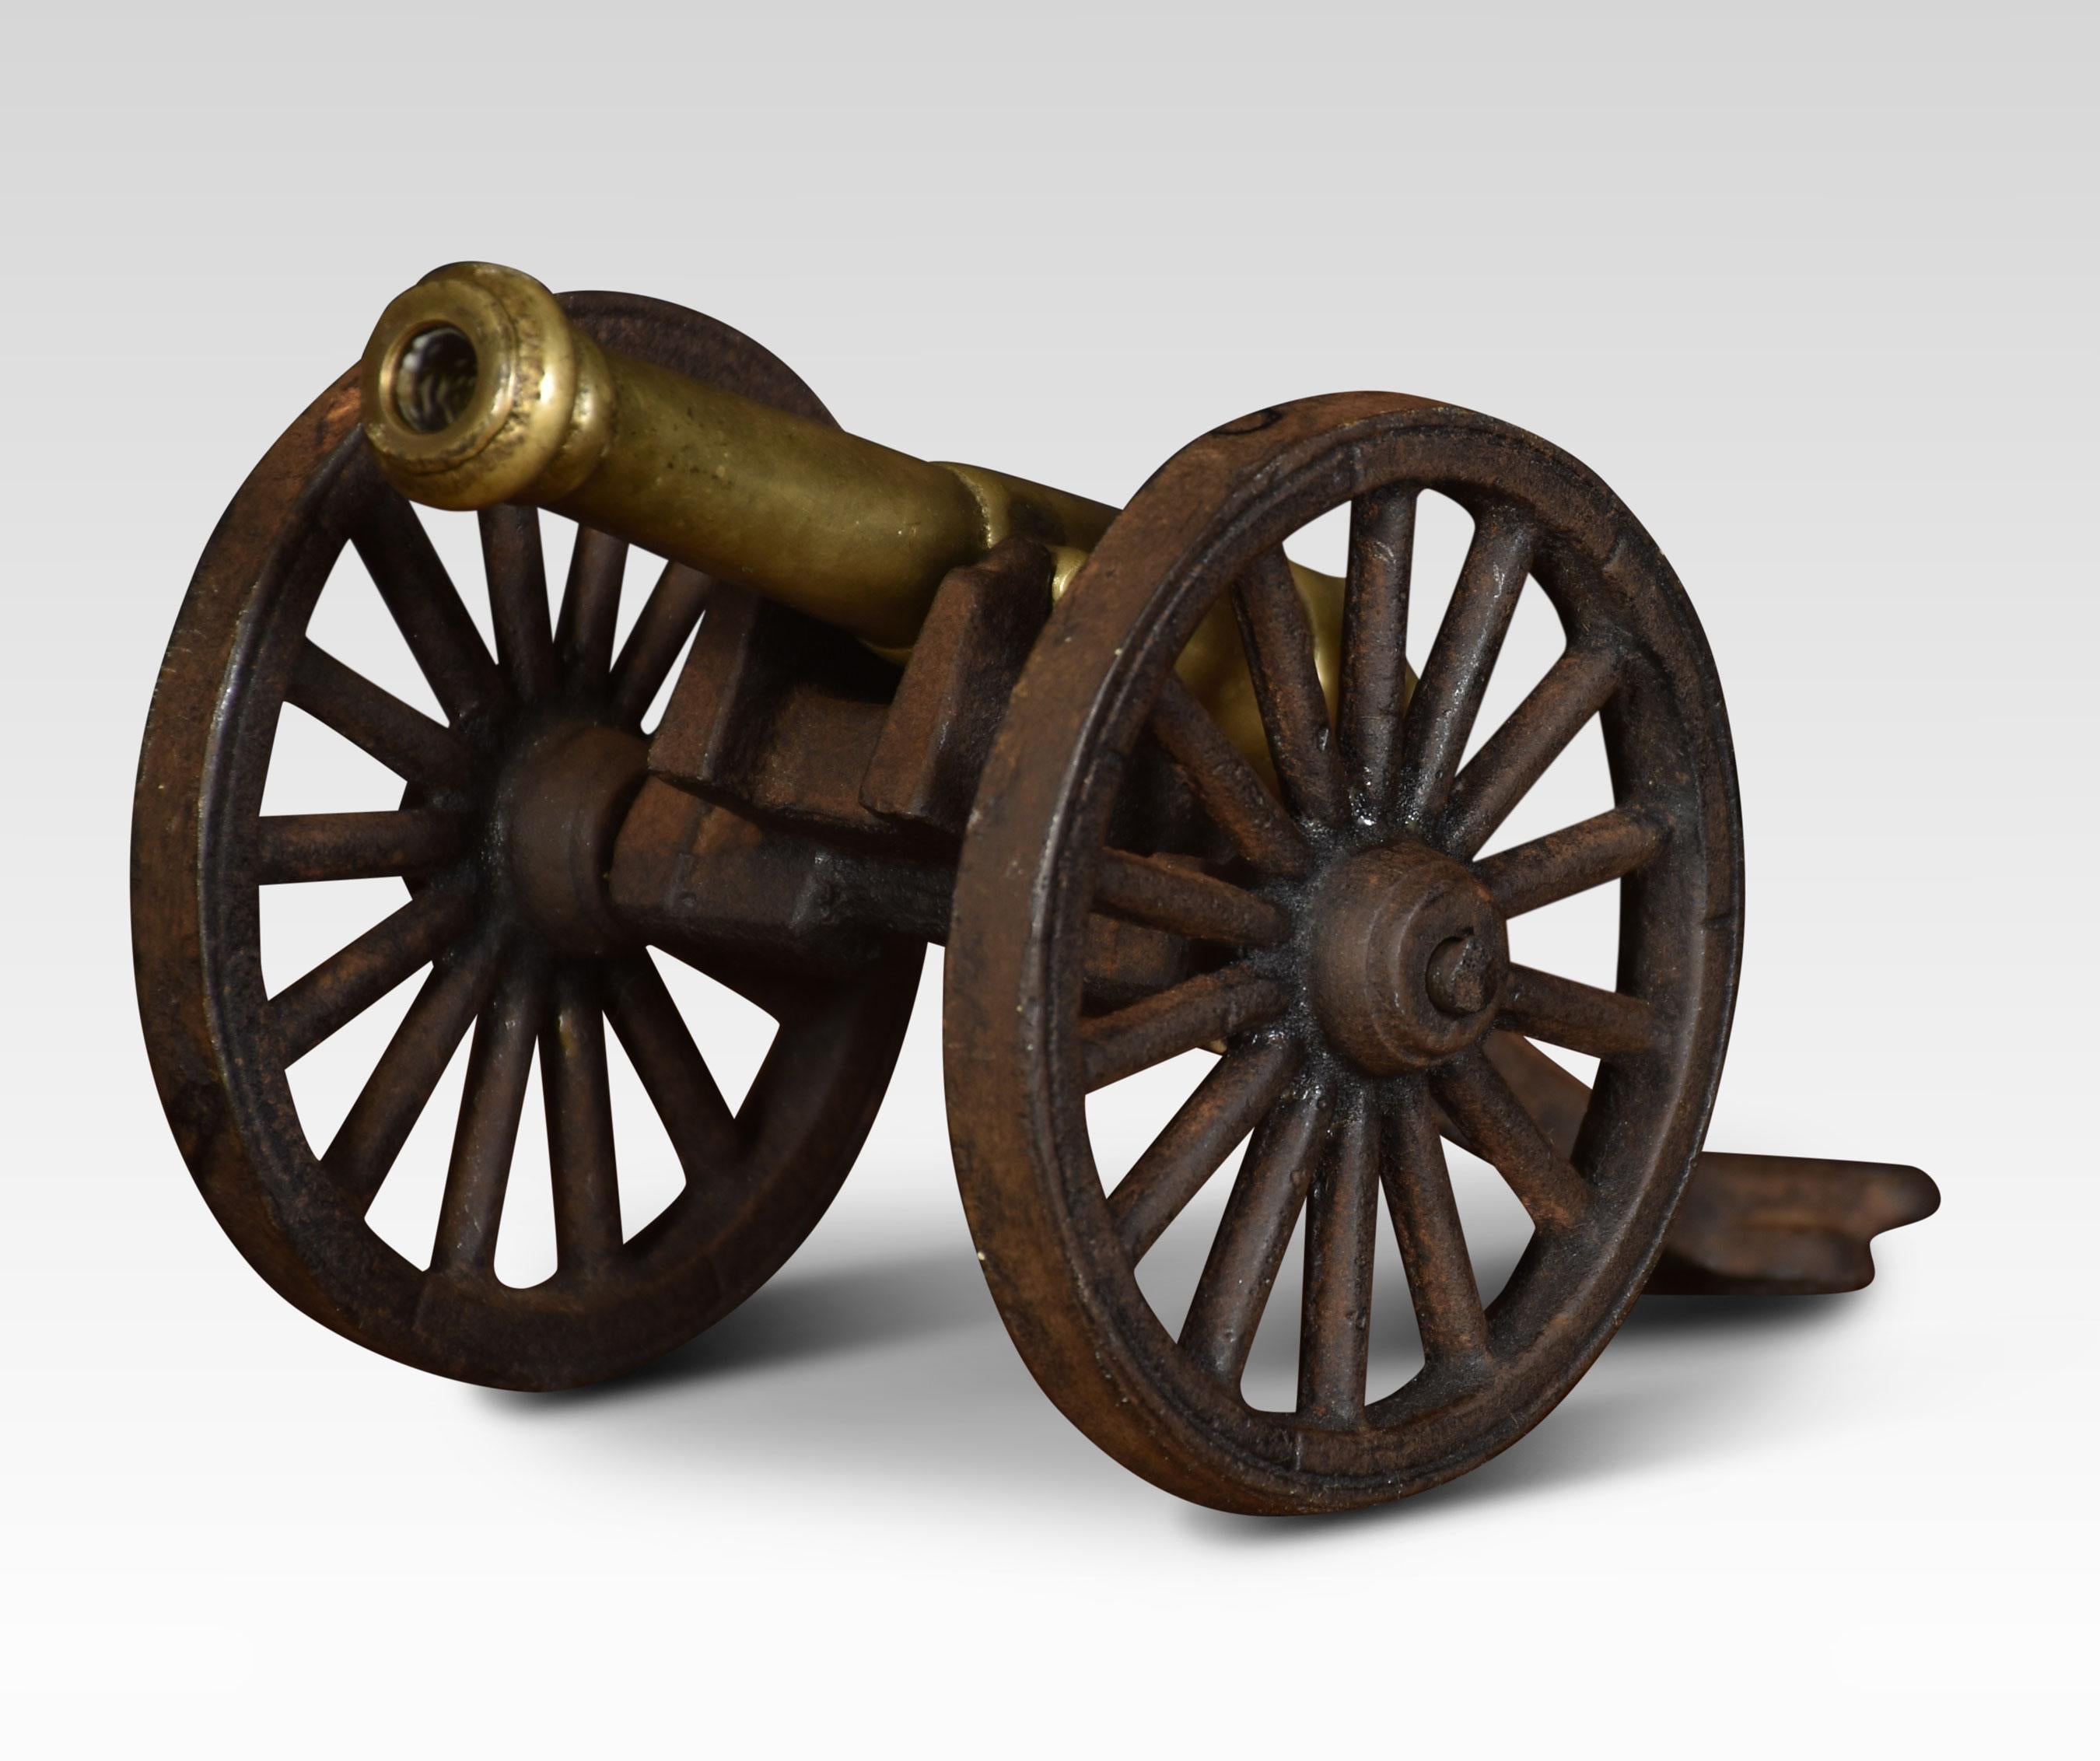 Moddel of a signal cannon with a brass barrel mounted on a wooden carriage with spoked wheels.
Dimensions
Height 4 inches
Width 4 inches
Depth 7.5 inches.